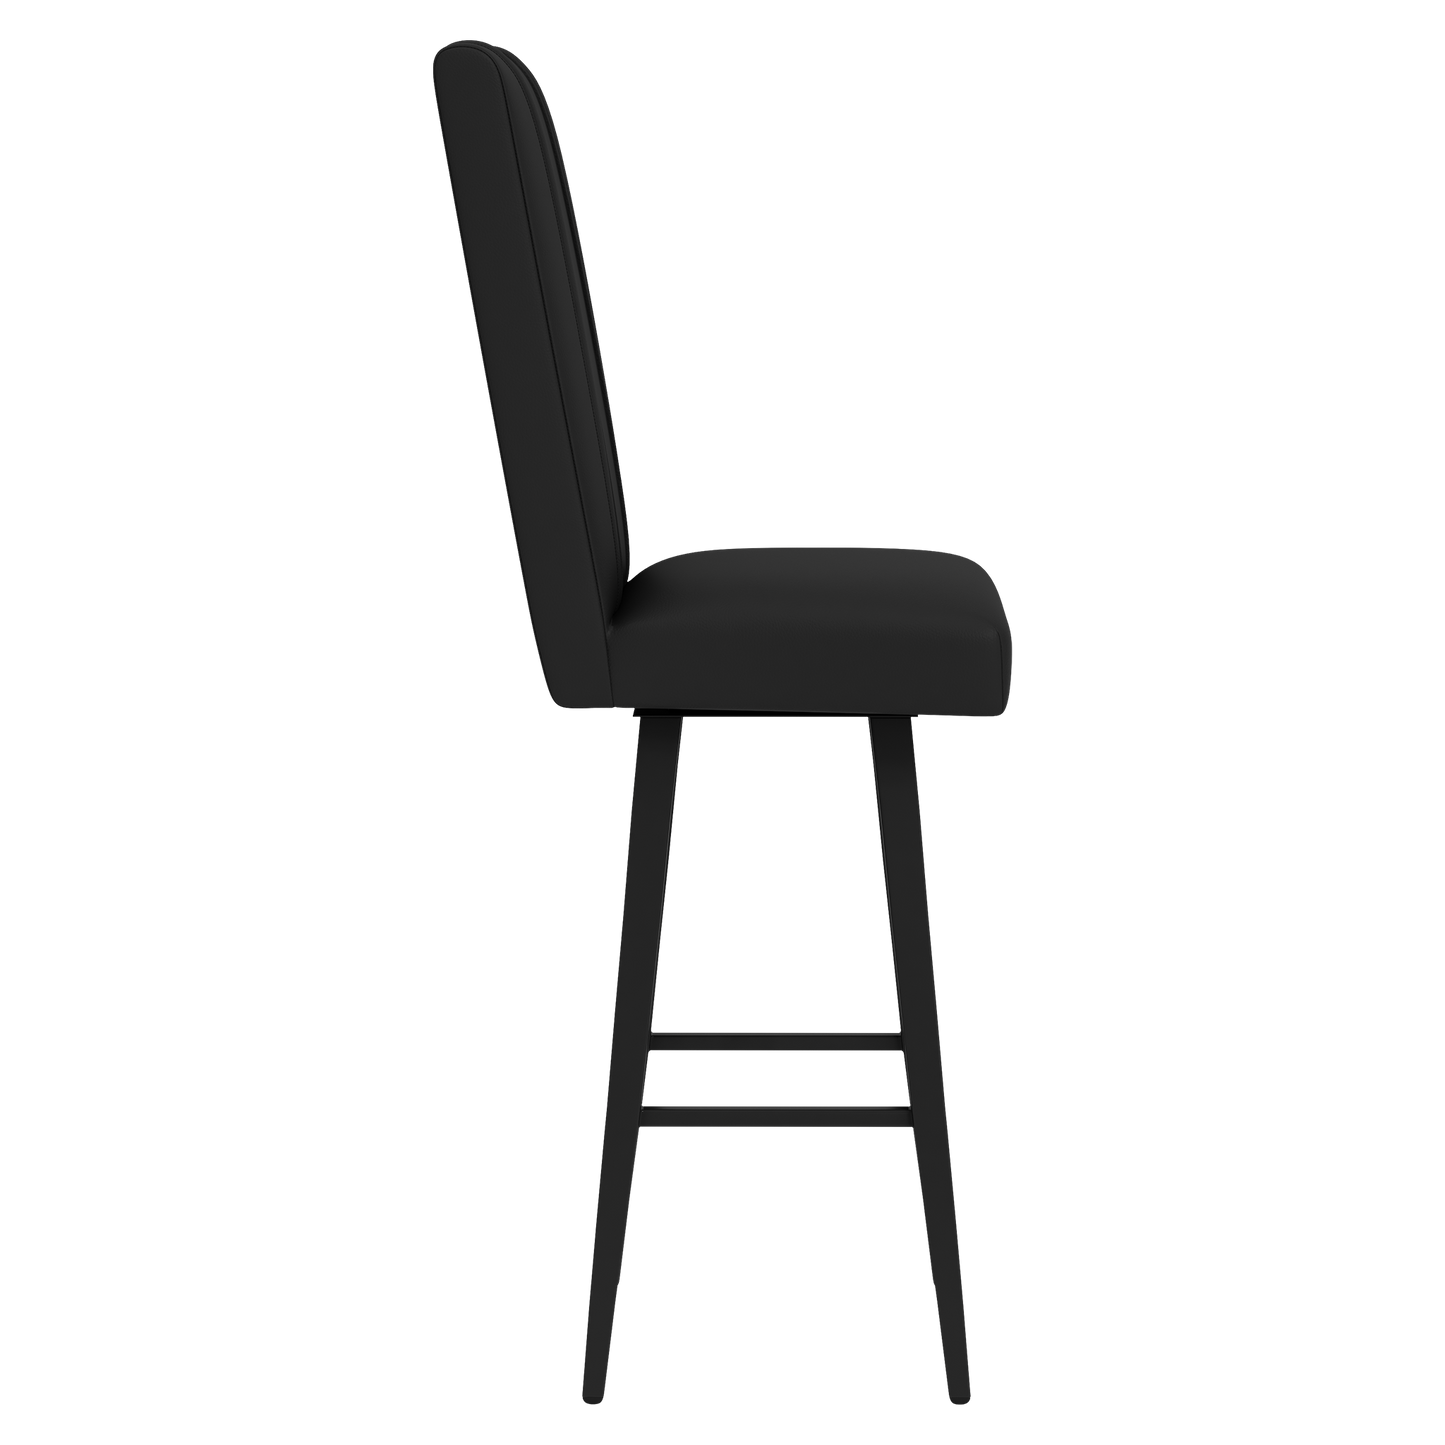 Swivel Bar Stool 2000 with Celtics Crossover Gaming Wordmark Green [CAN ONLY BE SHIPPED TO MASSACHUSETTS]